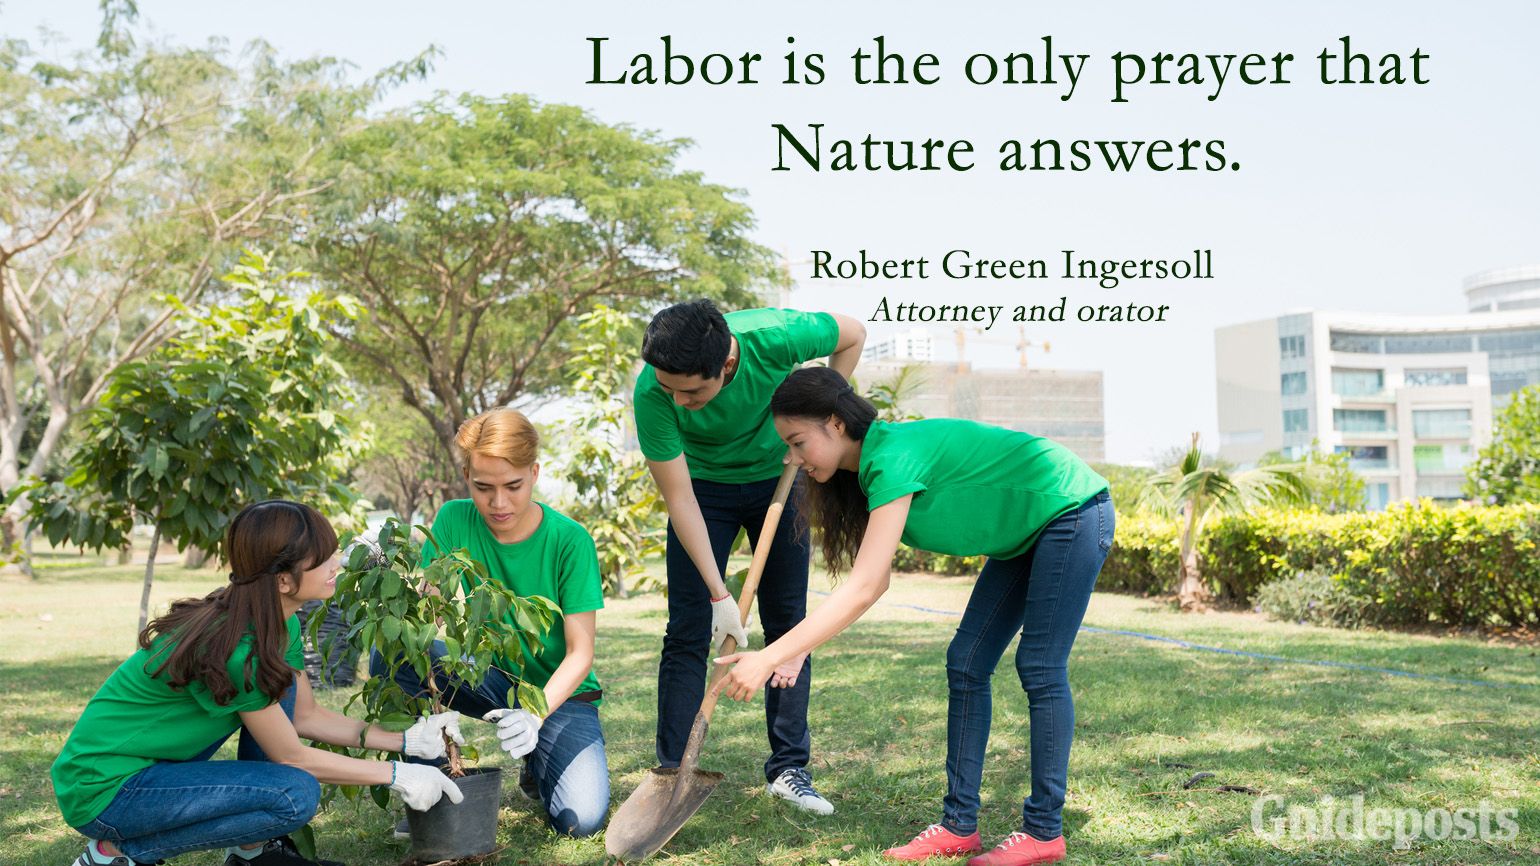 Inspiring Labor Day Quotes: Labor is the only prayer that Nature answers. Robert Green Ingersoll better living life advice